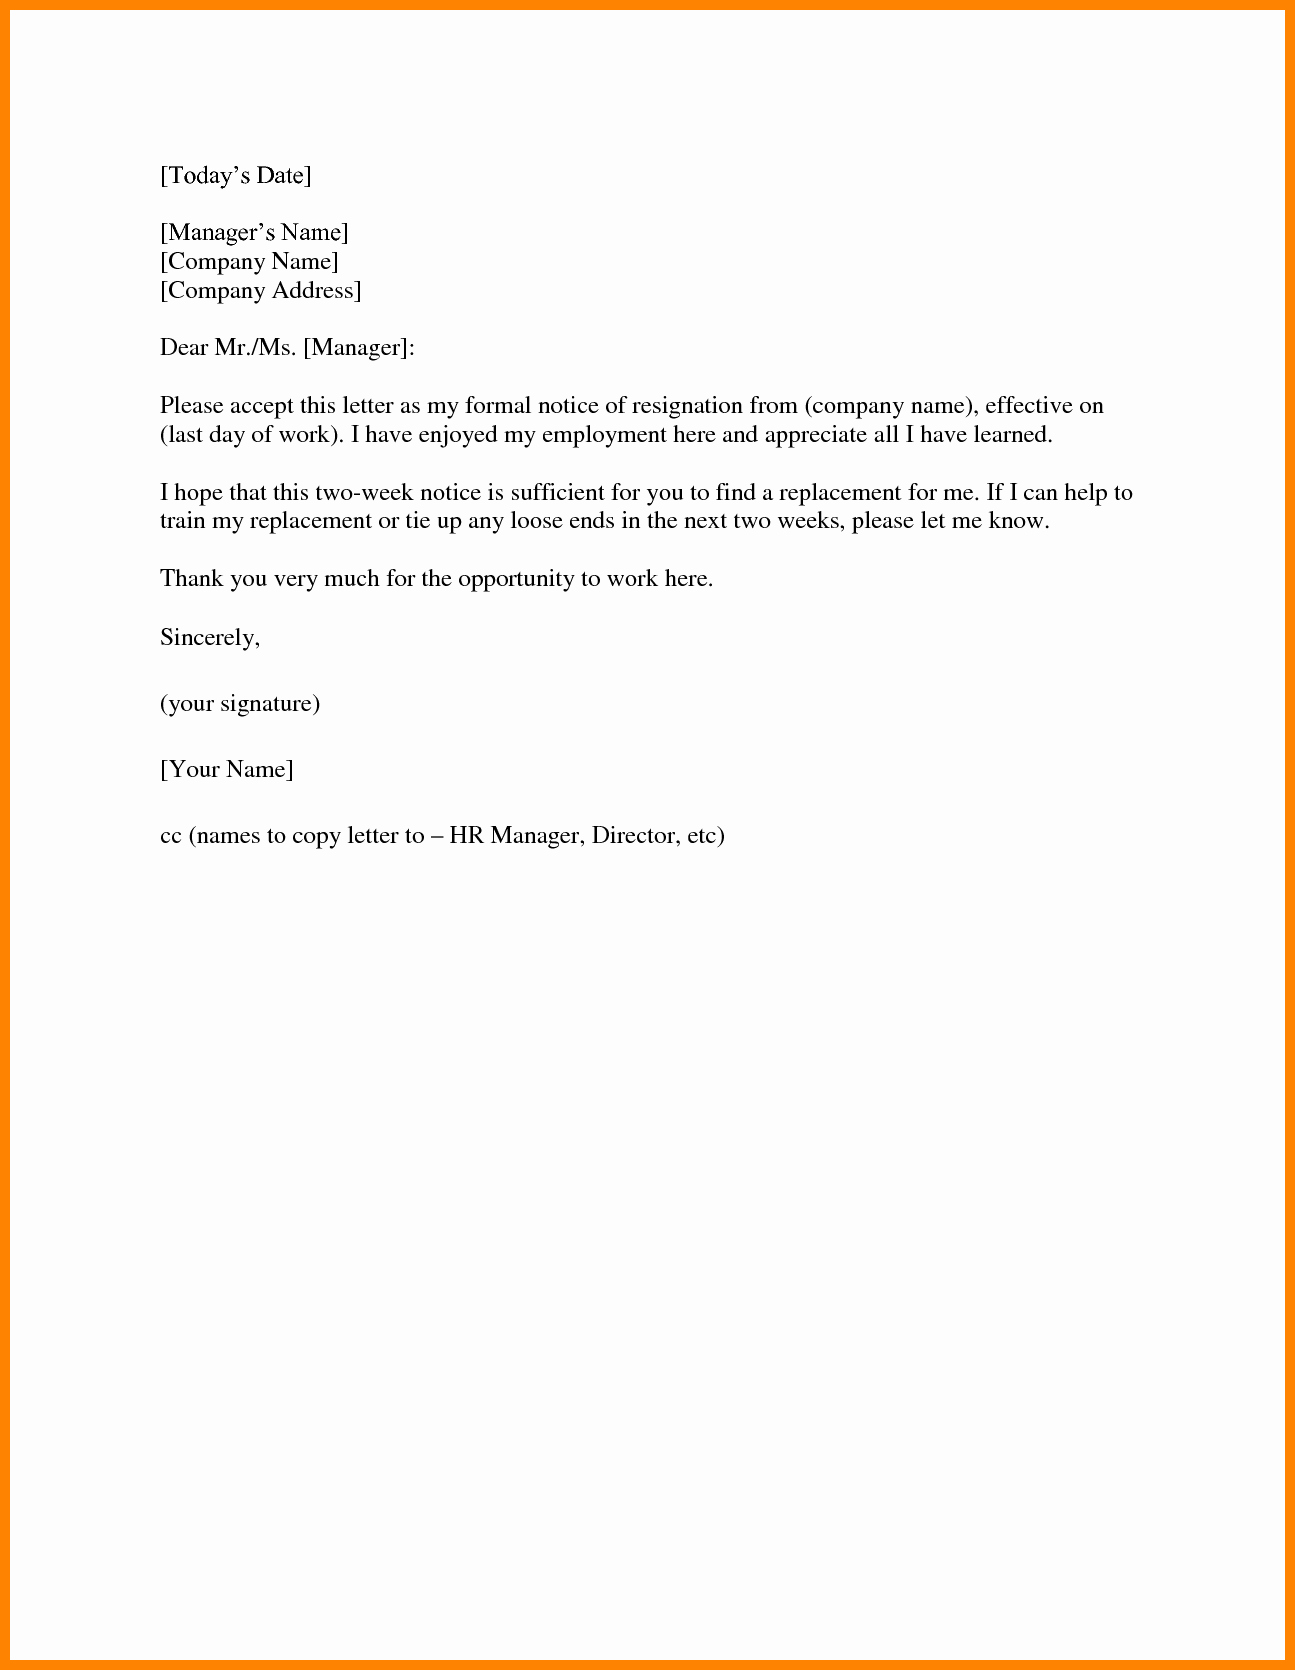 Resignation Letter Two Weeks Notice Fresh 7 formal Resignation Letter with 4 Weeks Notice